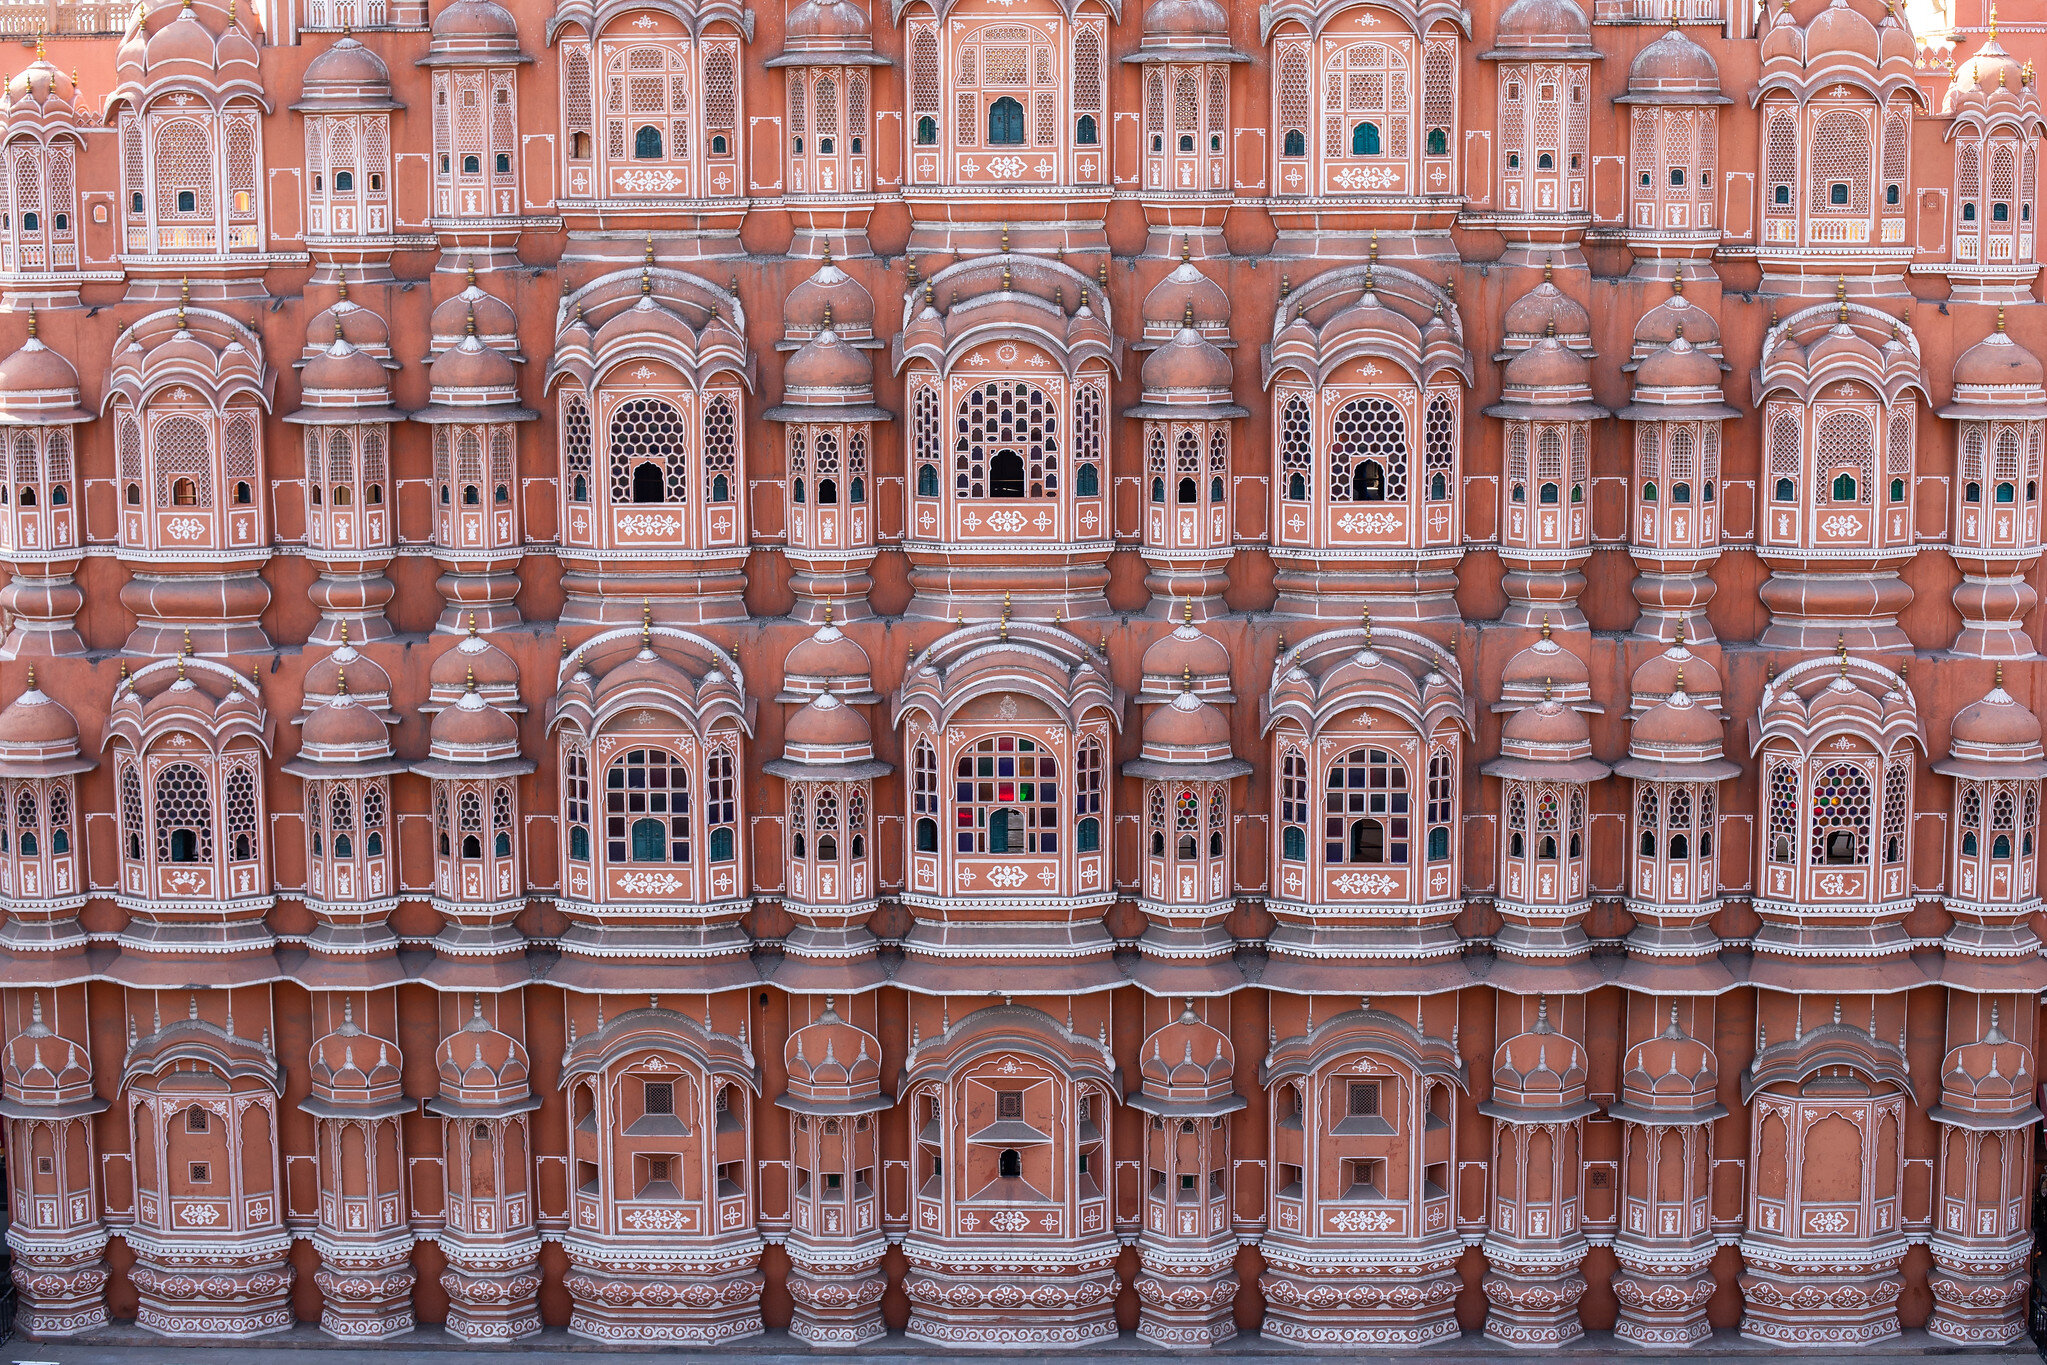 Hawa Mahal (English translation: "The Palace of Winds" or "The Palace of Breeze") is a palace in Jaipur, Rajasthan, India.